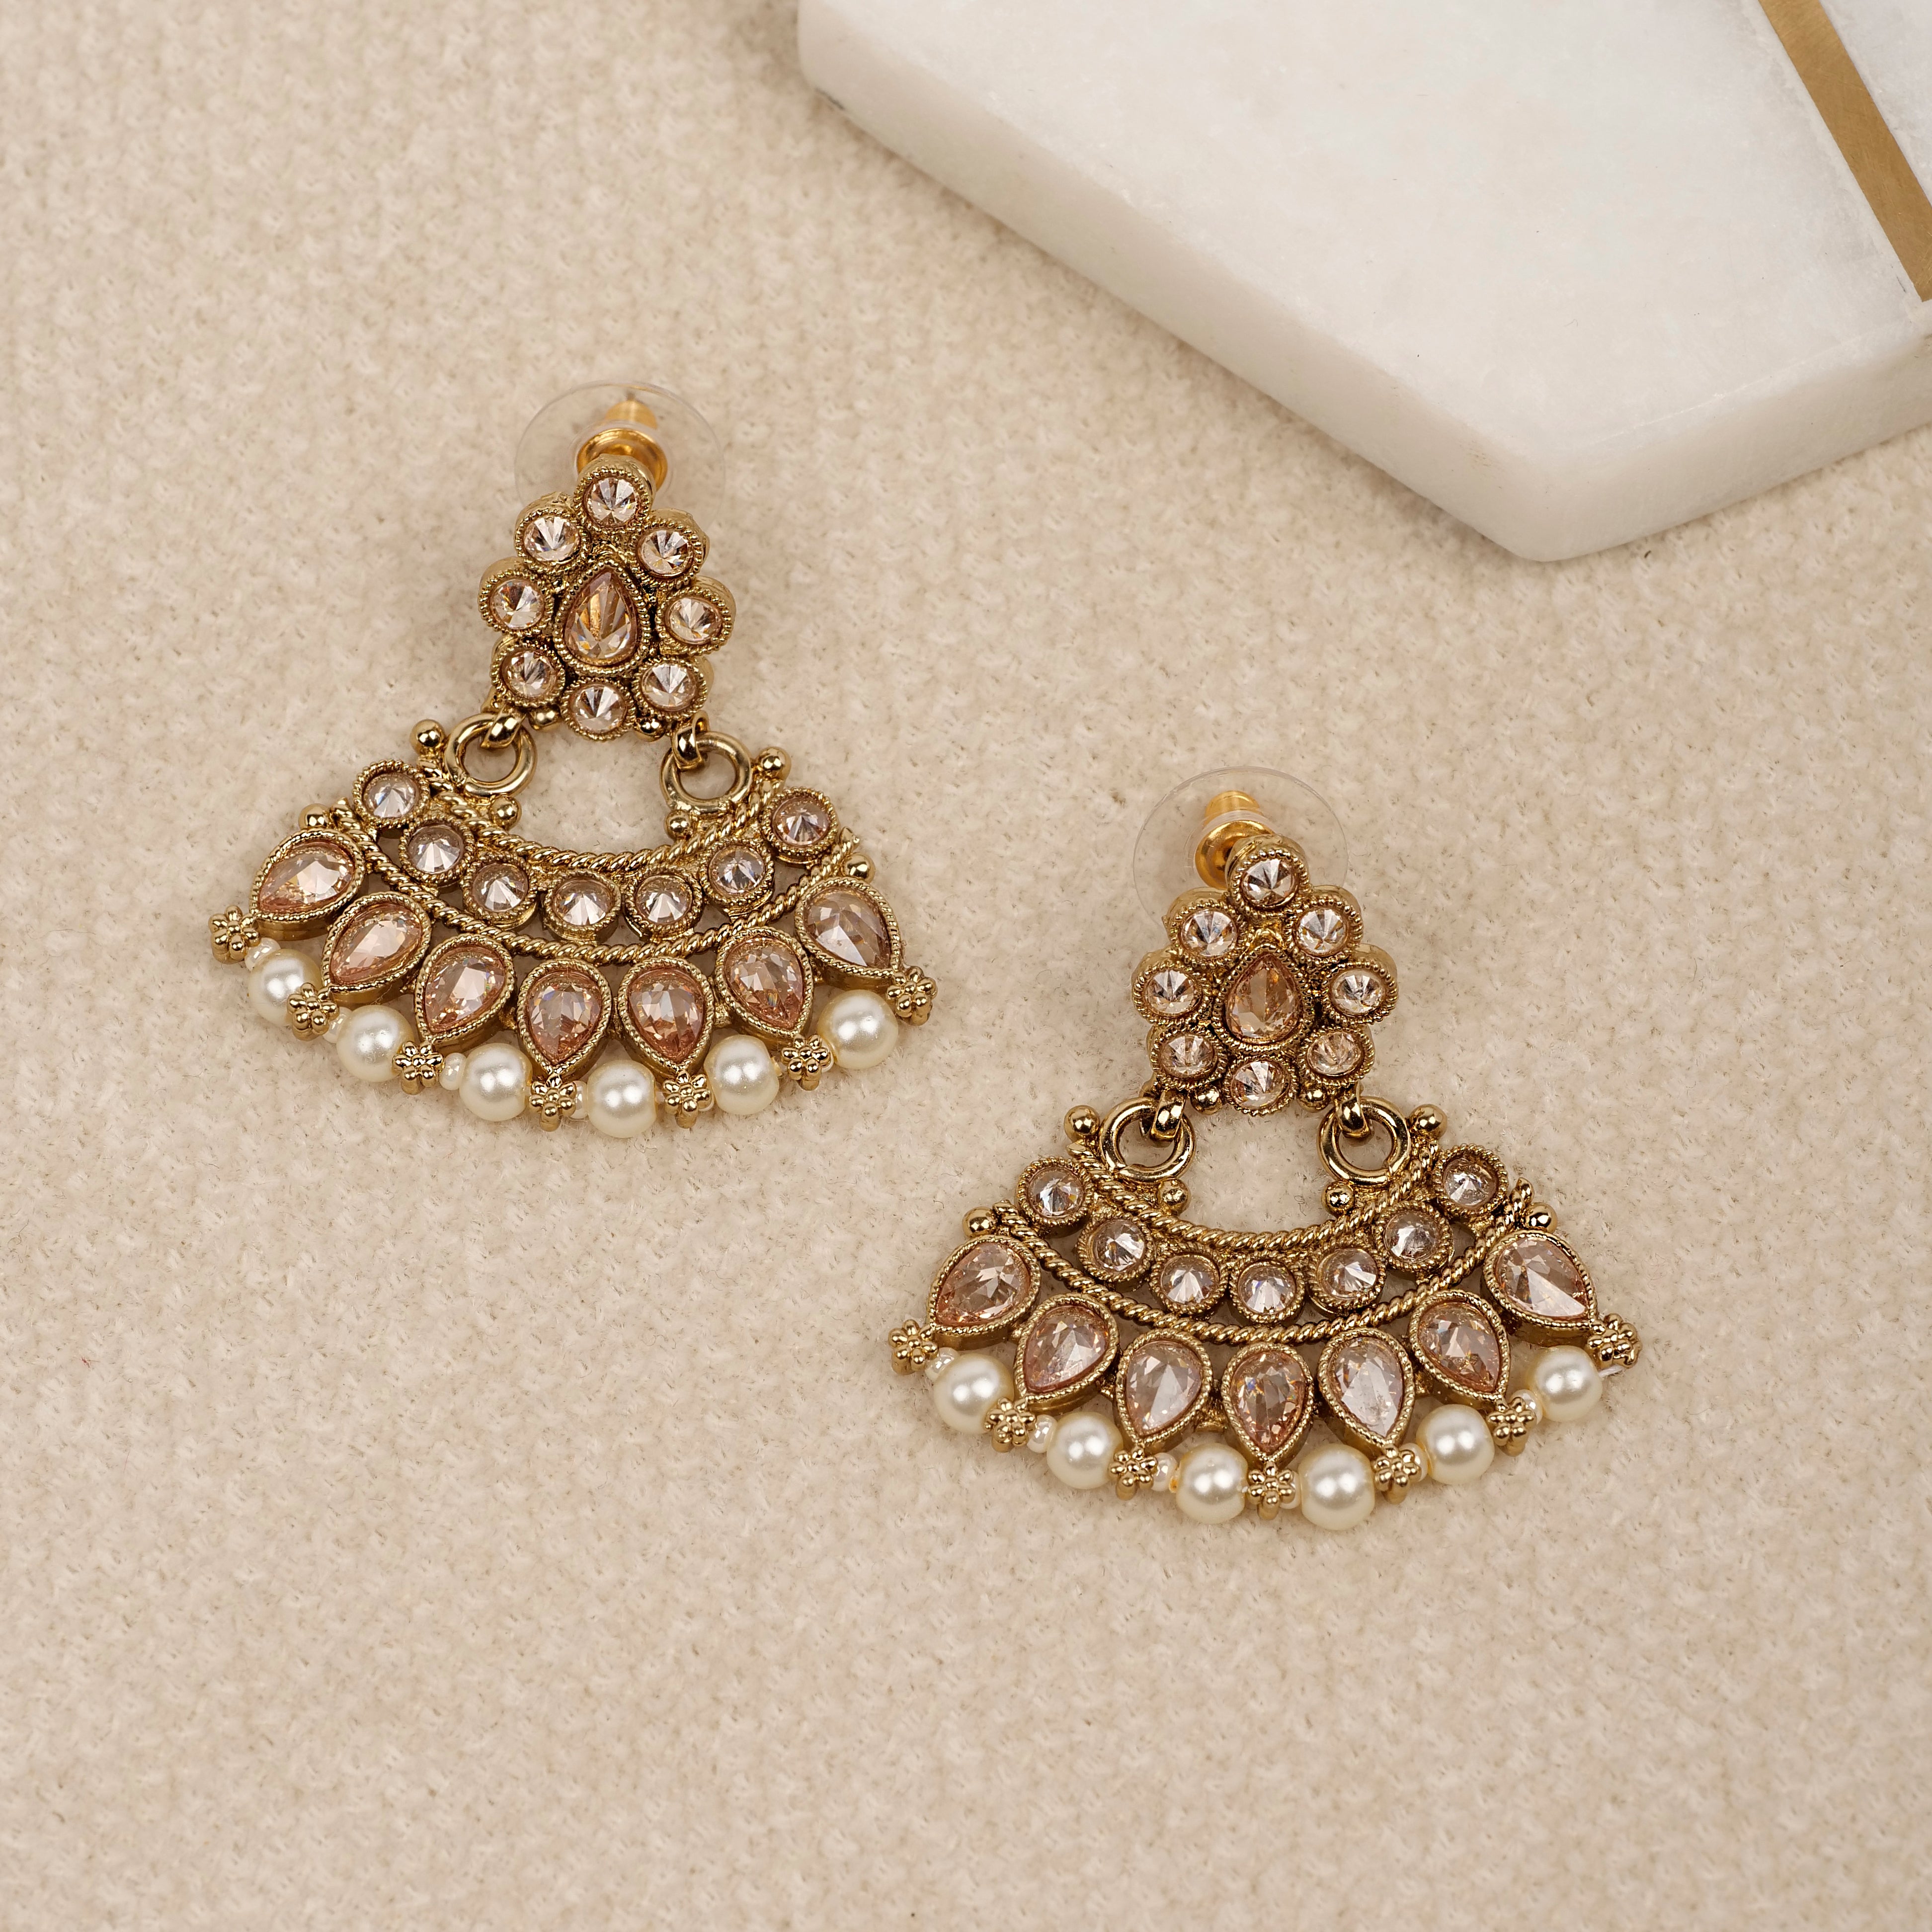 Anala Small Chandbali Earrings in Pearl and Antique Gold